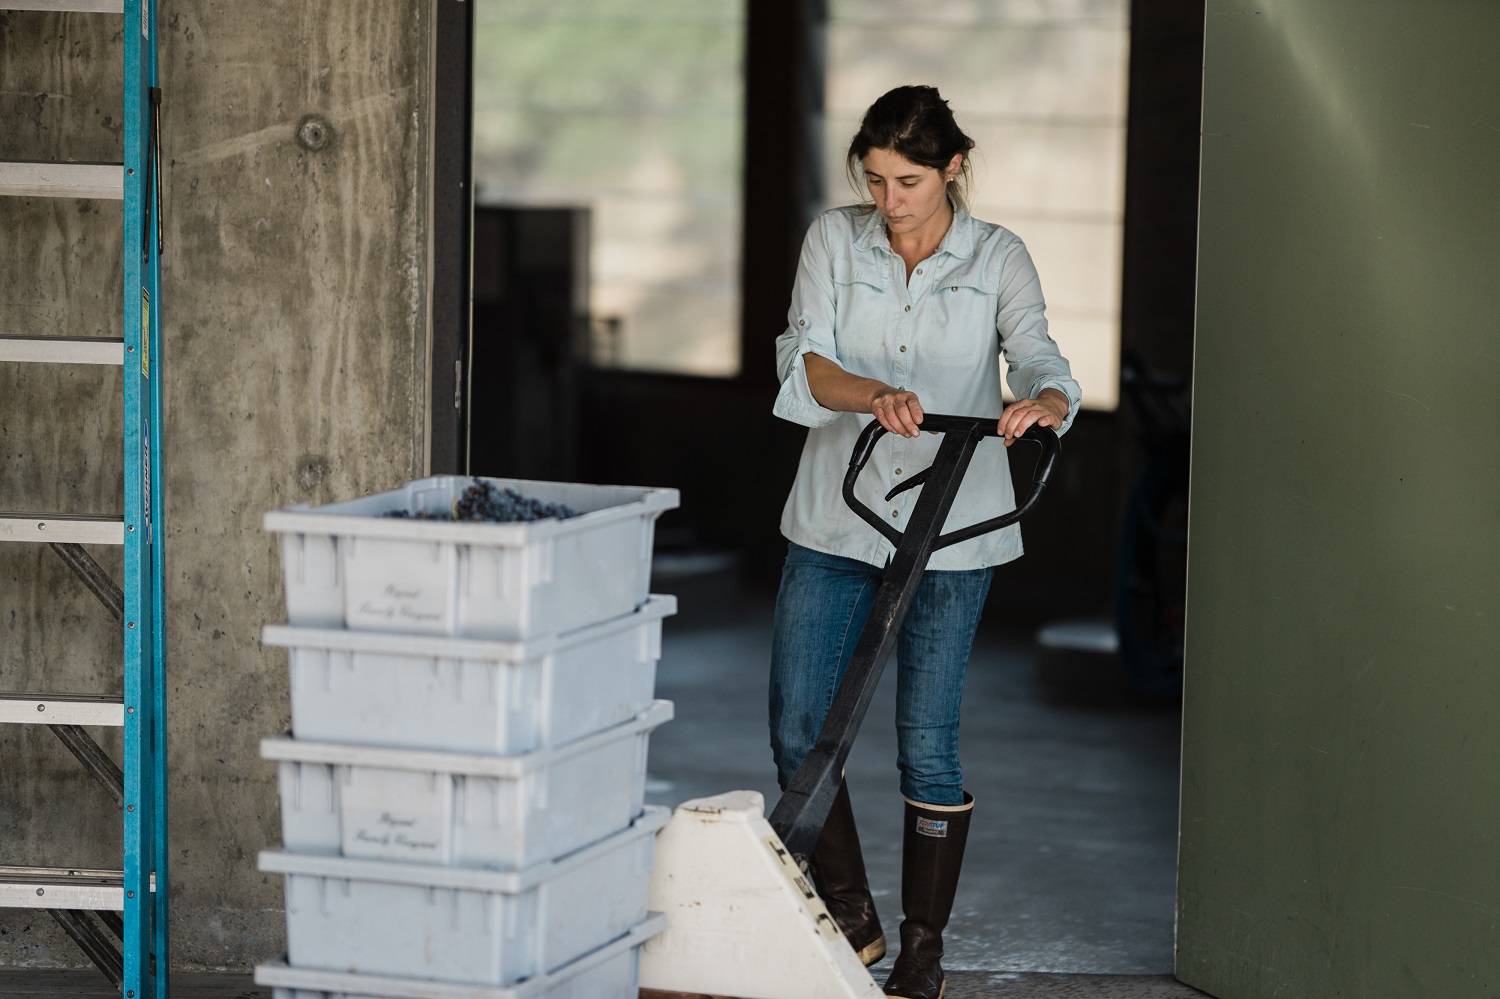 KK Carothers took over as winemaker at Bryant in 2018